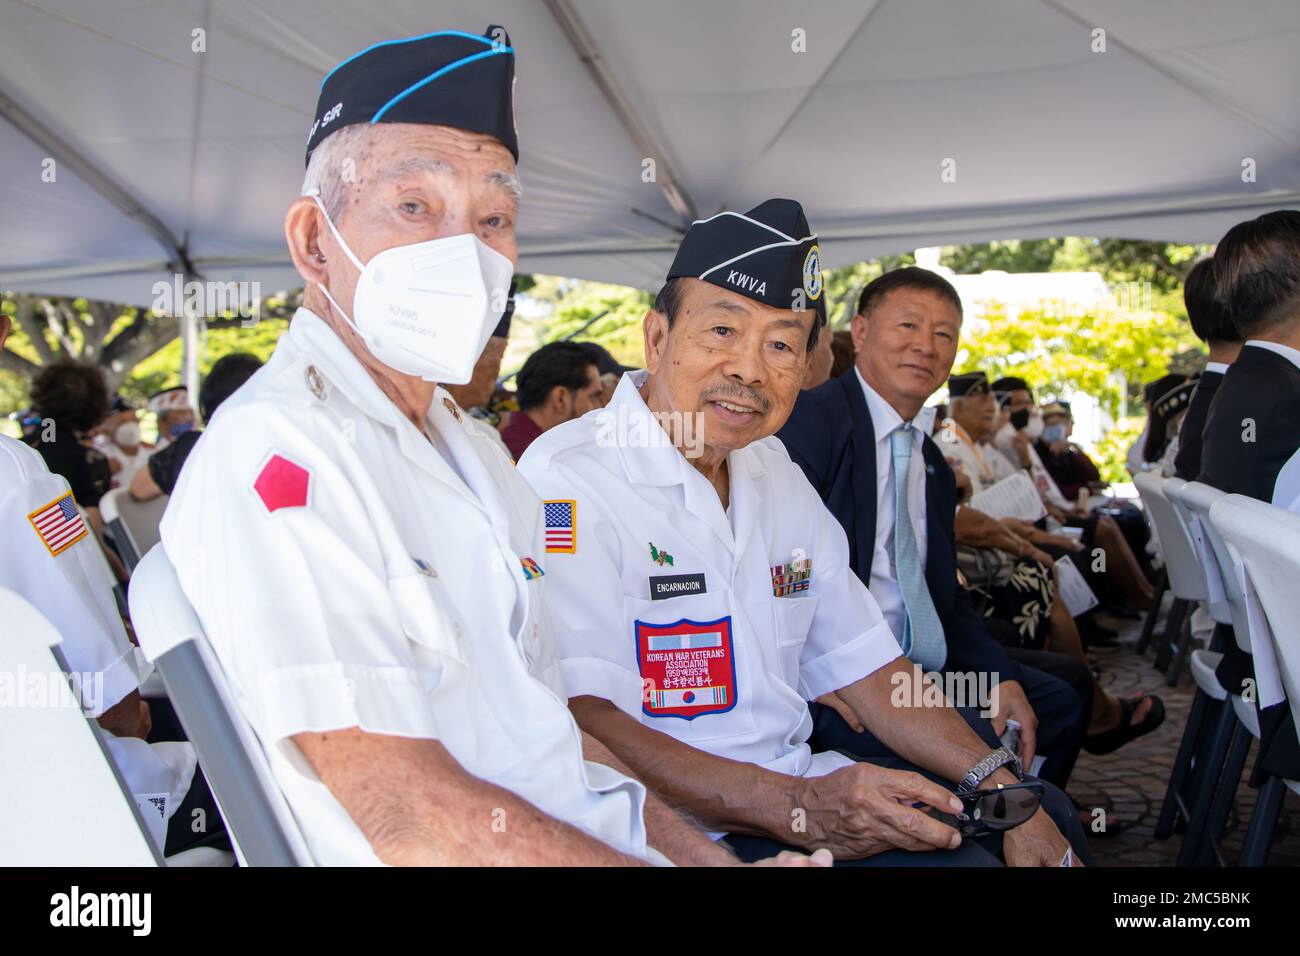 Members of the Korean War Veterans Association attend the 72nd Korean War Anniversary at the National Memorial Cemetery of the Pacific (Punchbowl) in Honolulu, Hawaii, June 25, 2022. The Korean War began on June 25, 1950, when North Korean armed forces invaded South Korea. The attack took place at several strategic points along the 38th parallel, the line dividing the communist Democratic People’s Republic of Korea from the Republic of Korea in the south. This event honors the lives lost and the sacrifices made during the war. Stock Photo